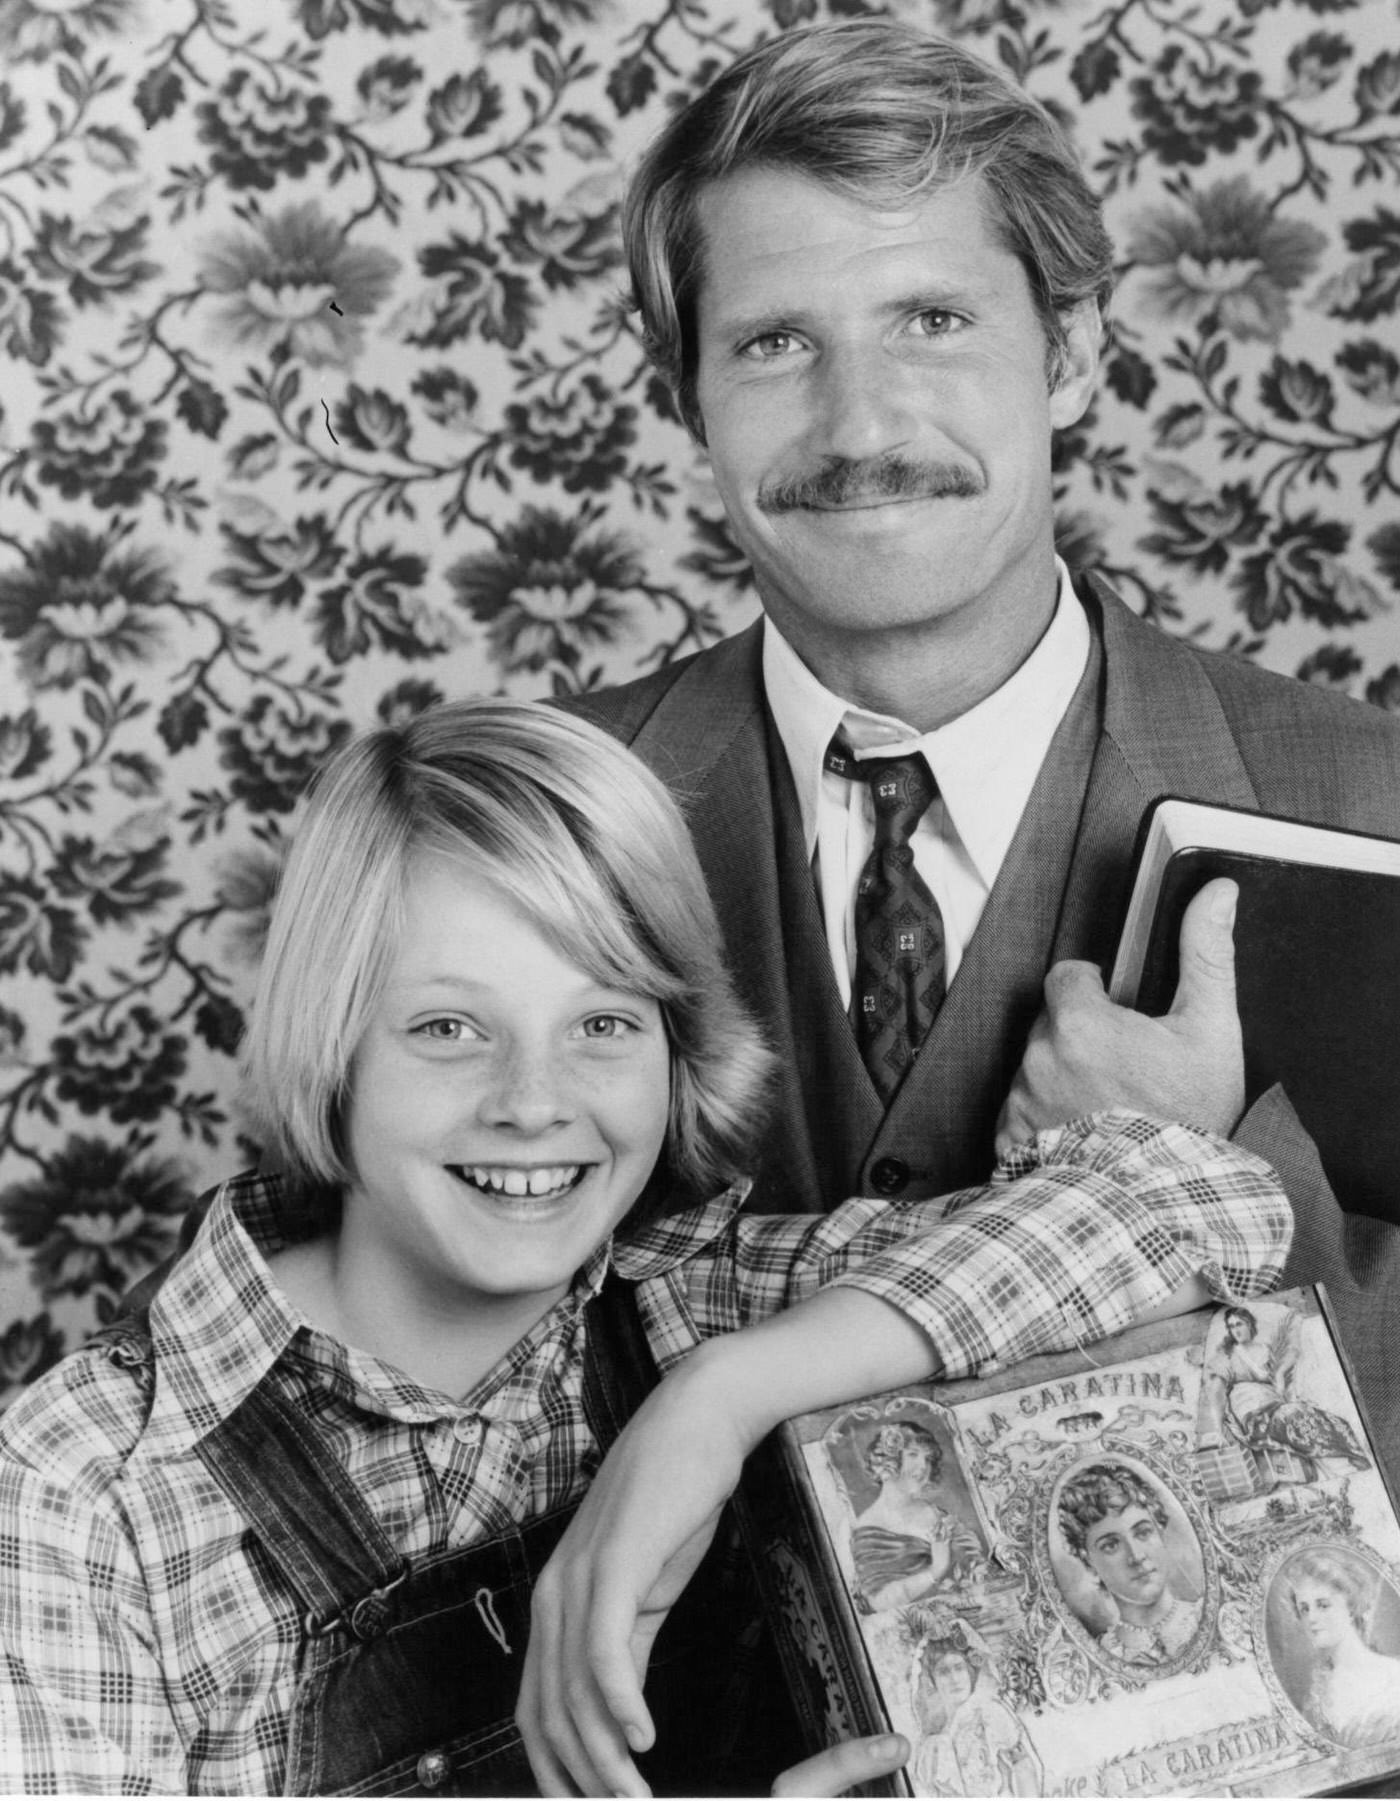 Jodie Foster and Christopher Connelly publicity portrait for 'Paper Moon', 1974.